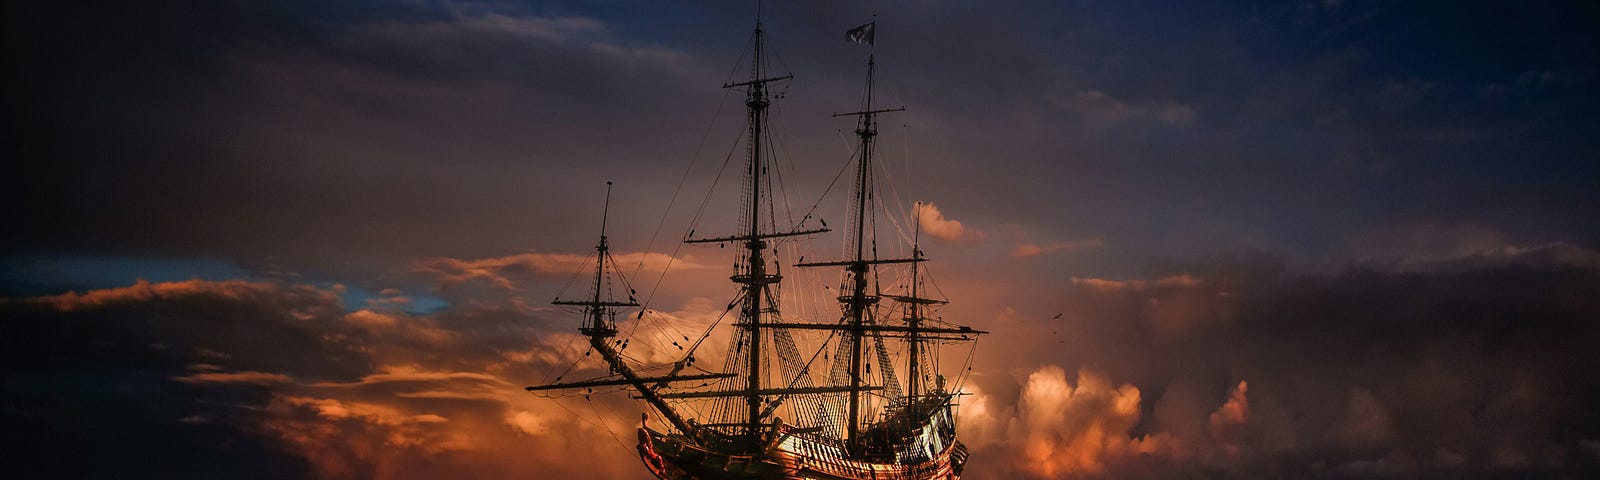 A pirate ship at sea with a darkening sky and sunlit clouds reflecting on the water.